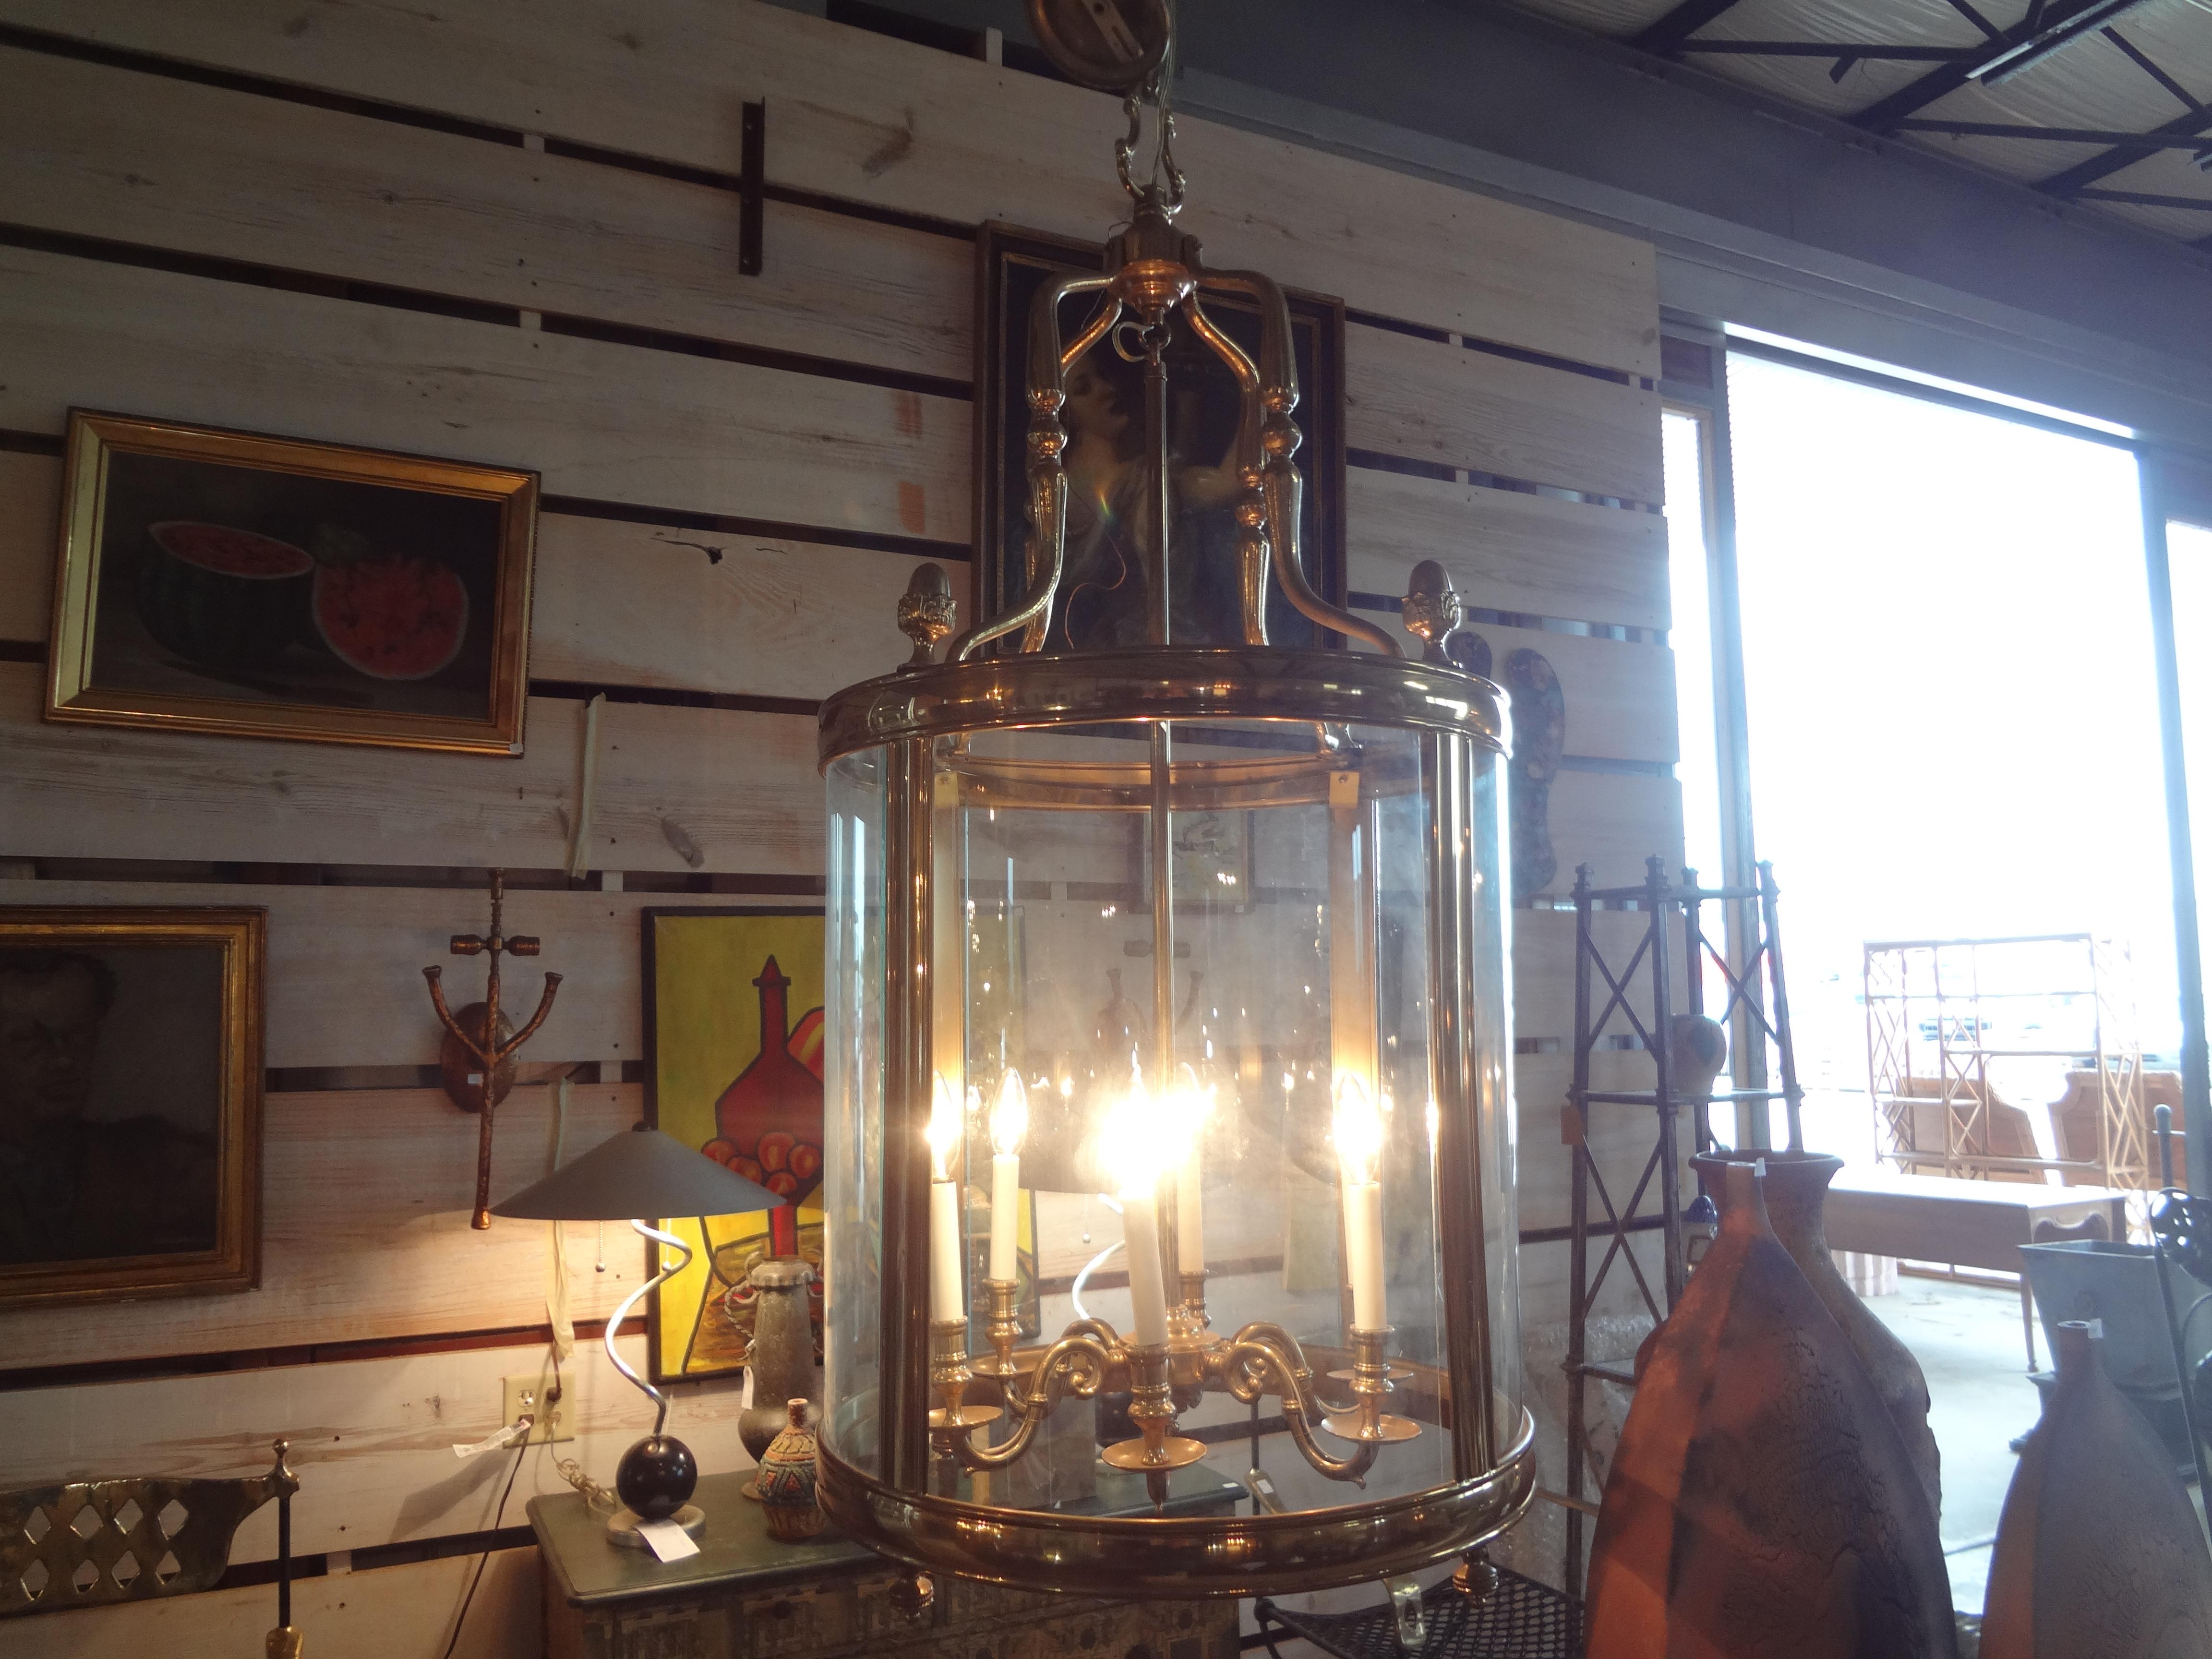 Monumental Italian Brass And Glass Lantern.
This huge 20th century Italian brass chandelier has beautiful curved glass panels and acorn finials. This lantern comes with 3 feet of brass chain.
Stunning!
Perfect entrance hall fixture!